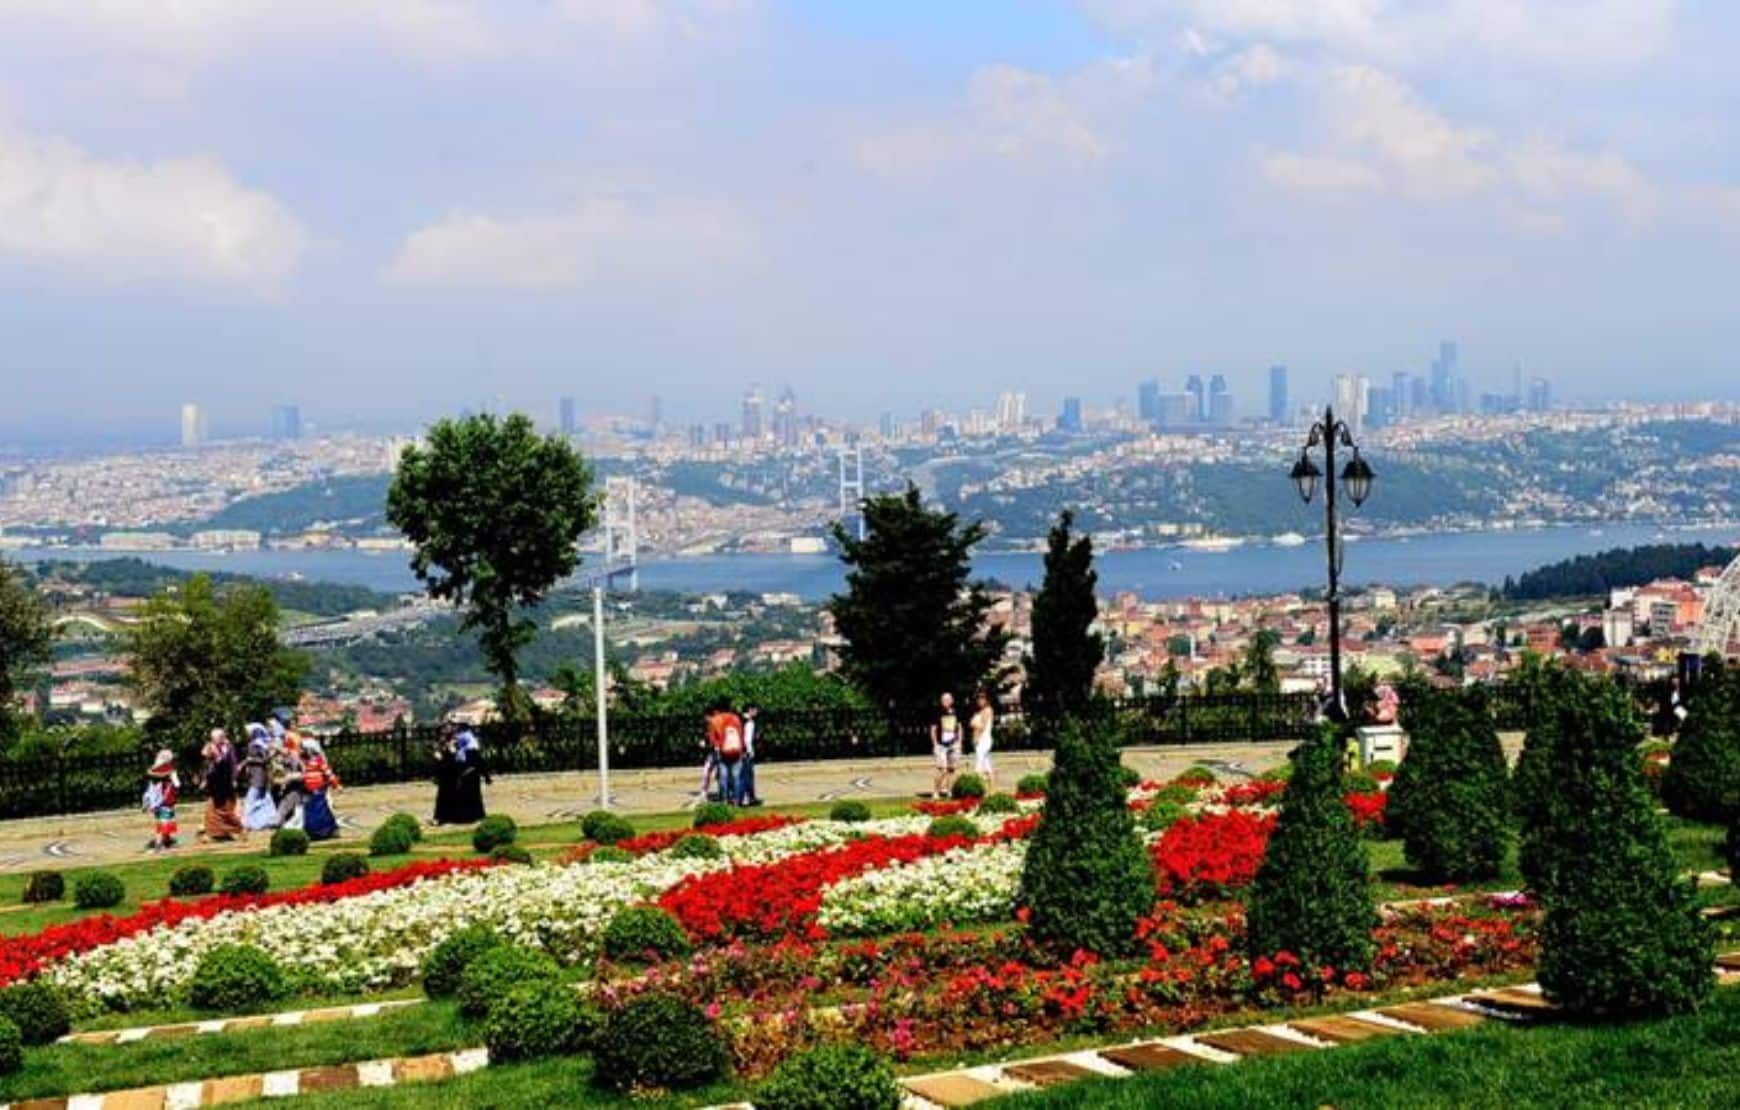 Visit Camlica Hill at our Istanbul Two Continents Tour